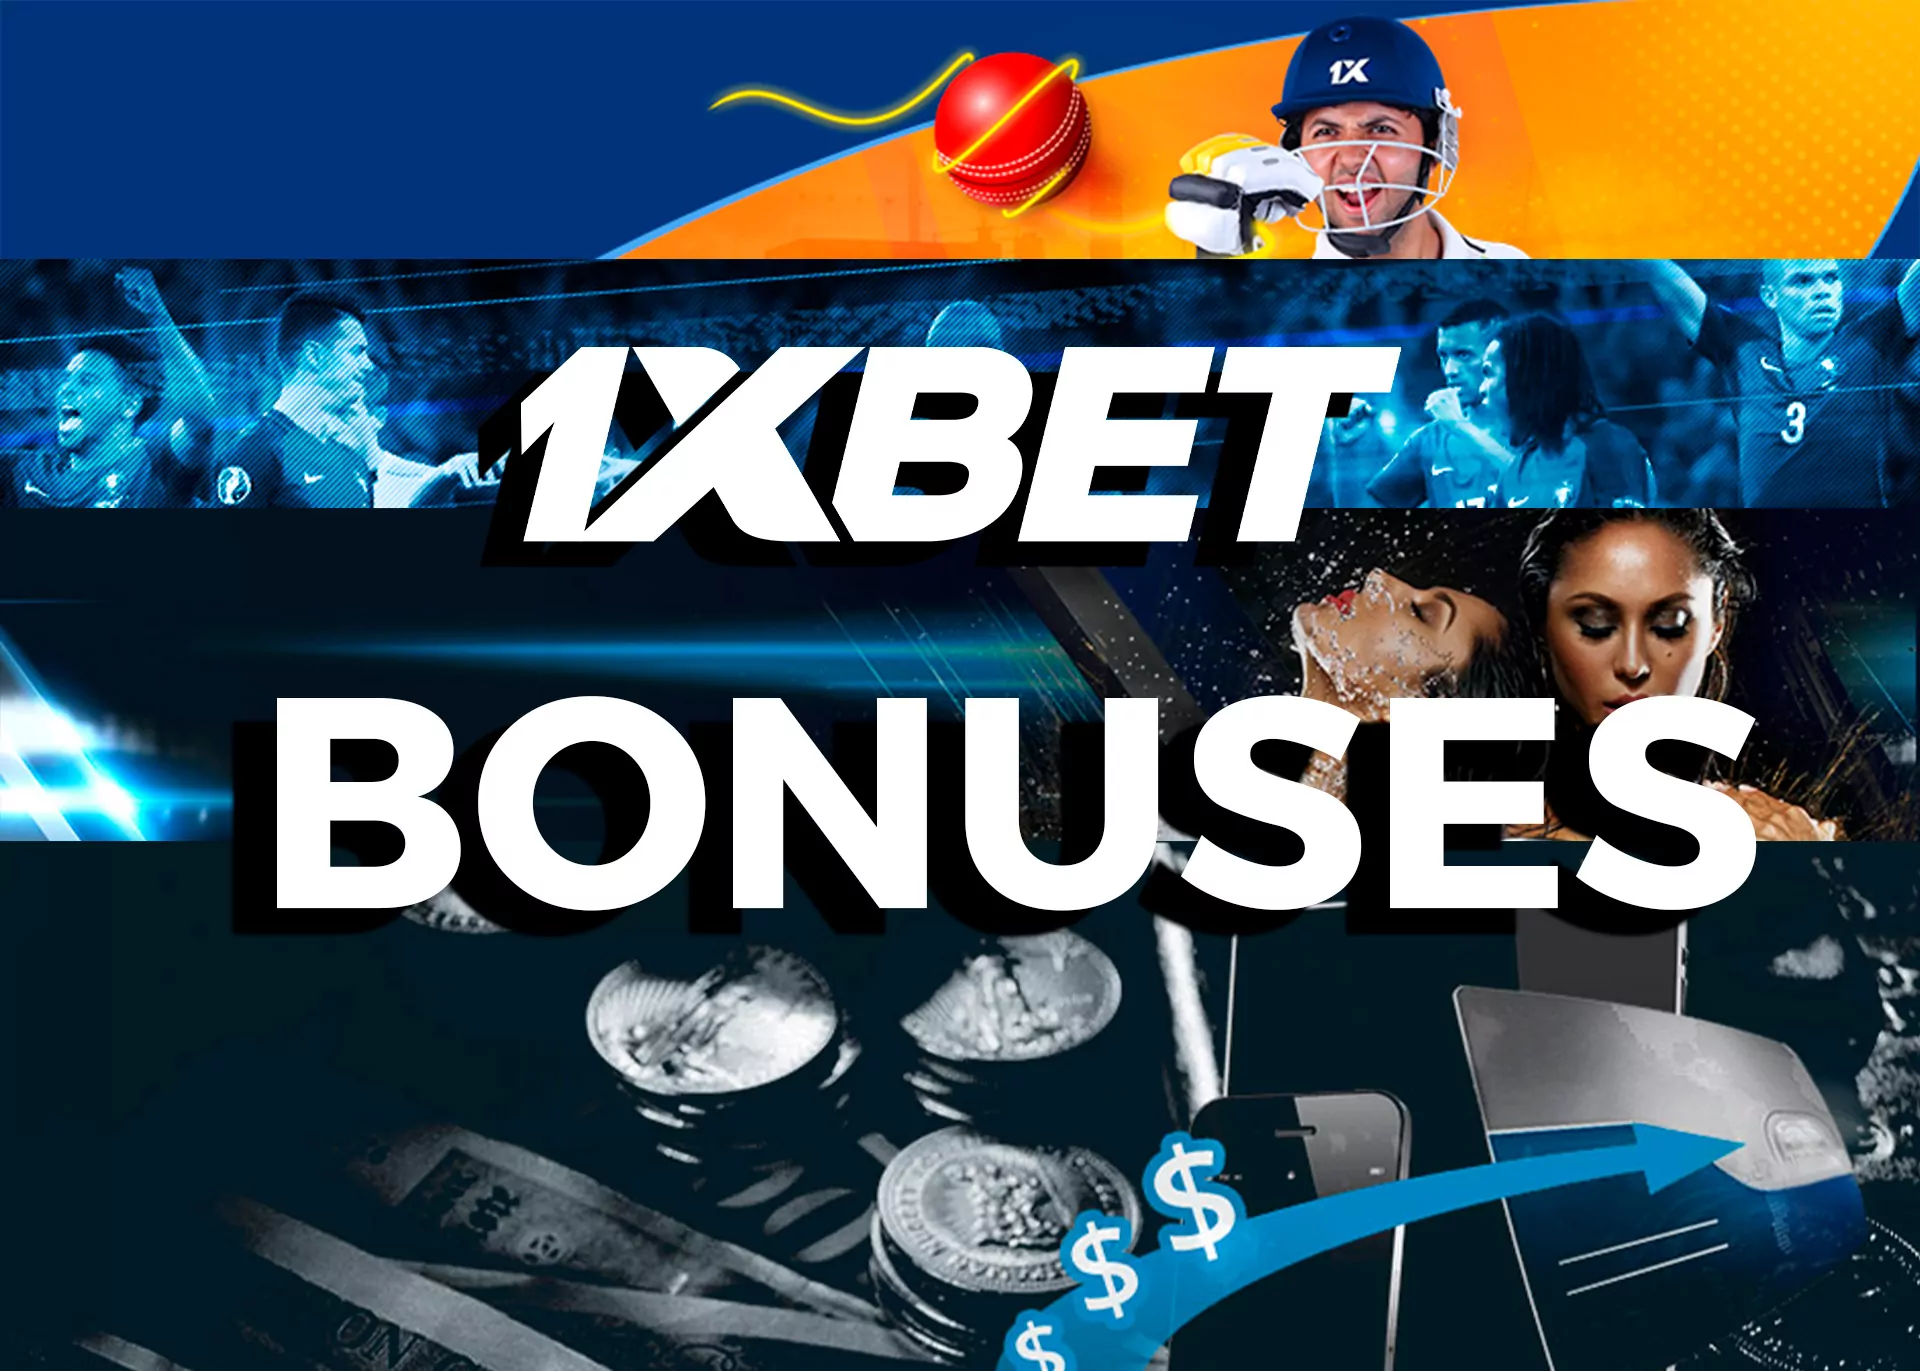 You can get the 1xbet welcome bonus and other bonuses right after registration and the first deposit.